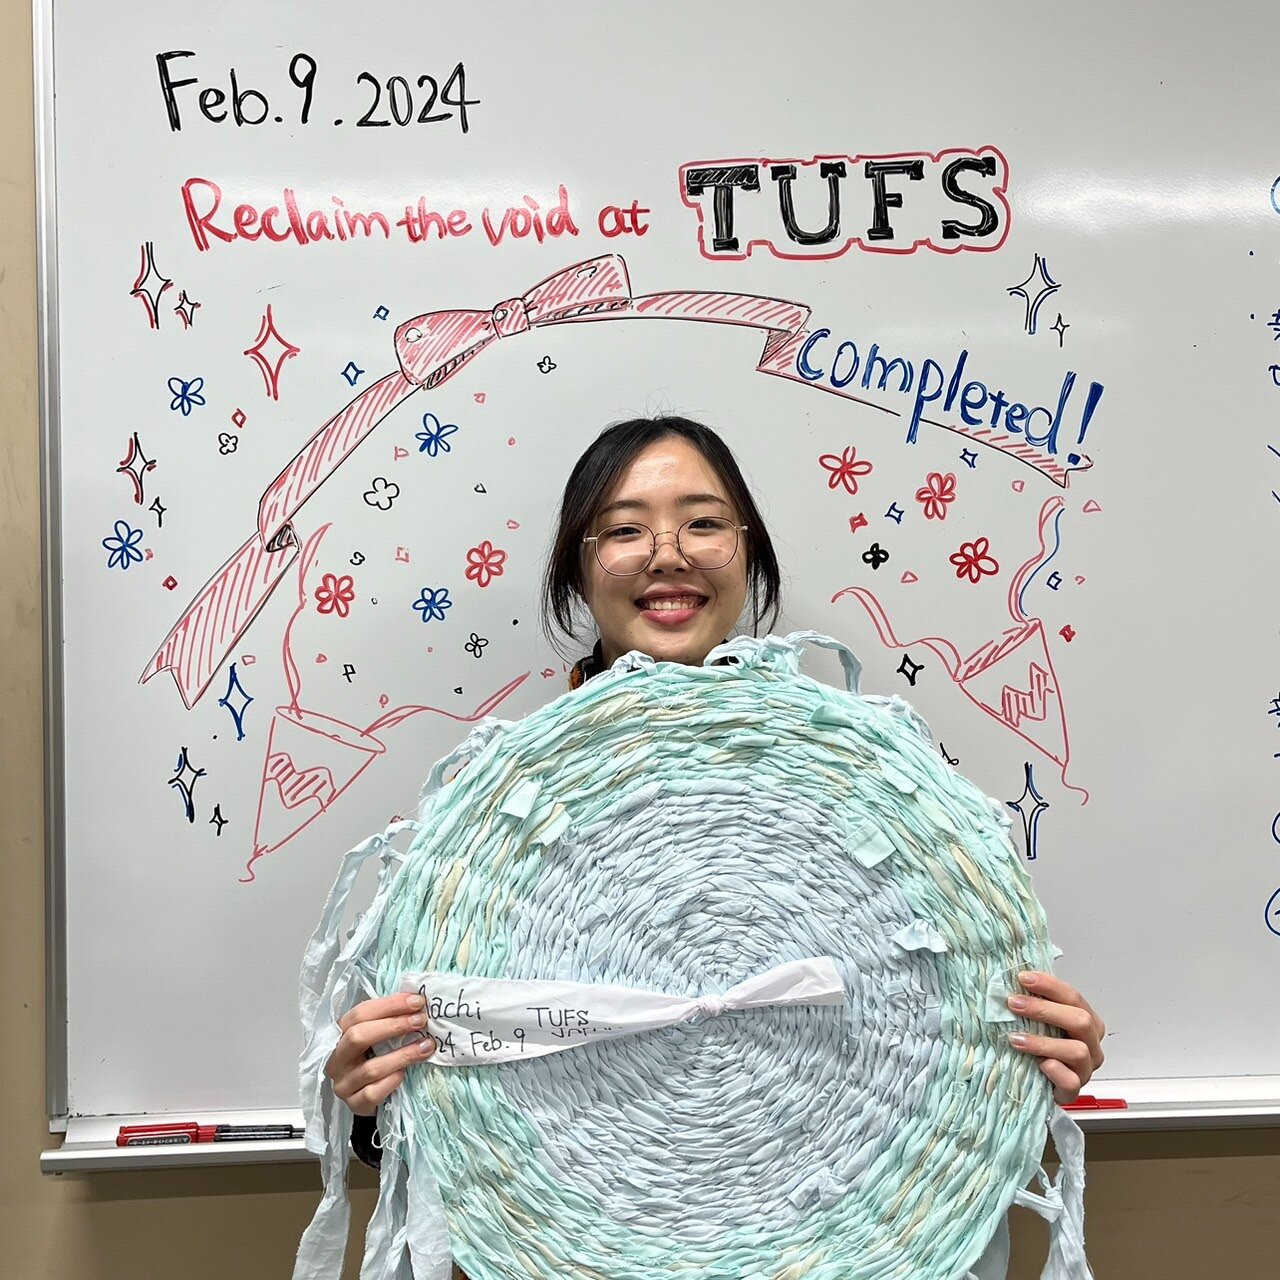 Our rug-hub in Tokyo has completed its work! Such a joy to have had the pleasure of meeting Machi when she came to one of our retreats on country. Machi has been inspired by the project, and wanting to make her fellow Japanese students aware of the i